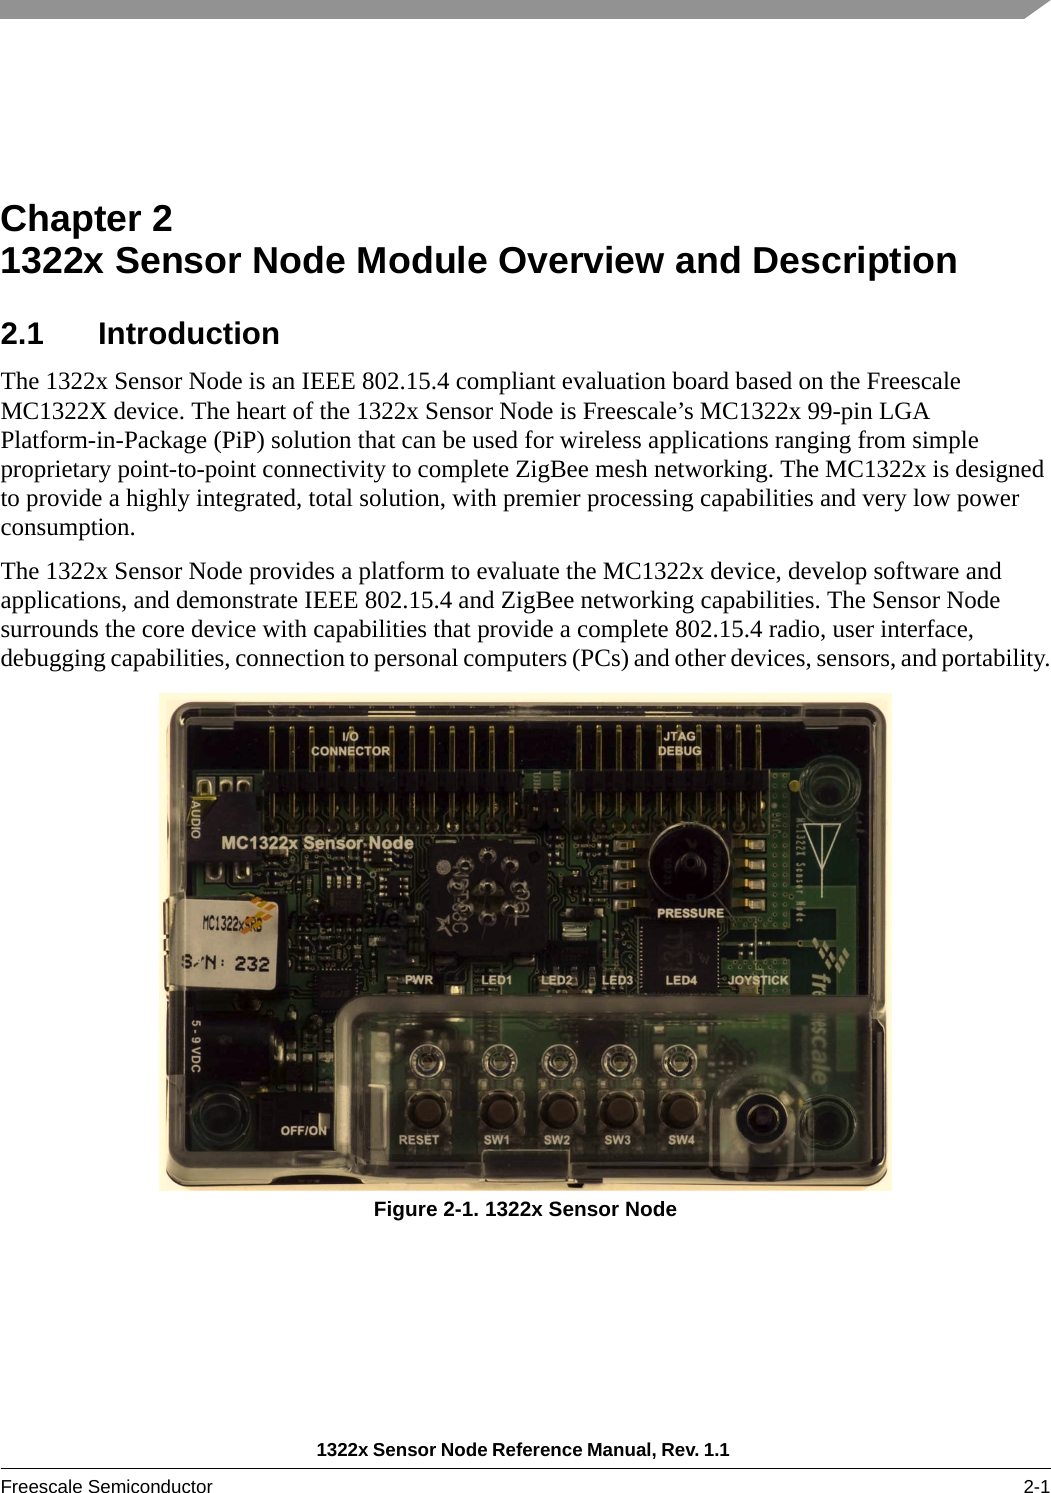 1322x Sensor Node Reference Manual, Rev. 1.1 Freescale Semiconductor 2-1Chapter 2  1322x Sensor Node Module Overview and Description2.1 IntroductionThe 1322x Sensor Node is an IEEE 802.15.4 compliant evaluation board based on the Freescale MC1322X device. The heart of the 1322x Sensor Node is Freescale’s MC1322x 99-pin LGA Platform-in-Package (PiP) solution that can be used for wireless applications ranging from simple proprietary point-to-point connectivity to complete ZigBee mesh networking. The MC1322x is designed to provide a highly integrated, total solution, with premier processing capabilities and very low power consumption.The 1322x Sensor Node provides a platform to evaluate the MC1322x device, develop software and applications, and demonstrate IEEE 802.15.4 and ZigBee networking capabilities. The Sensor Node surrounds the core device with capabilities that provide a complete 802.15.4 radio, user interface, debugging capabilities, connection to personal computers (PCs) and other devices, sensors, and portability.Figure 2-1. 1322x Sensor Node